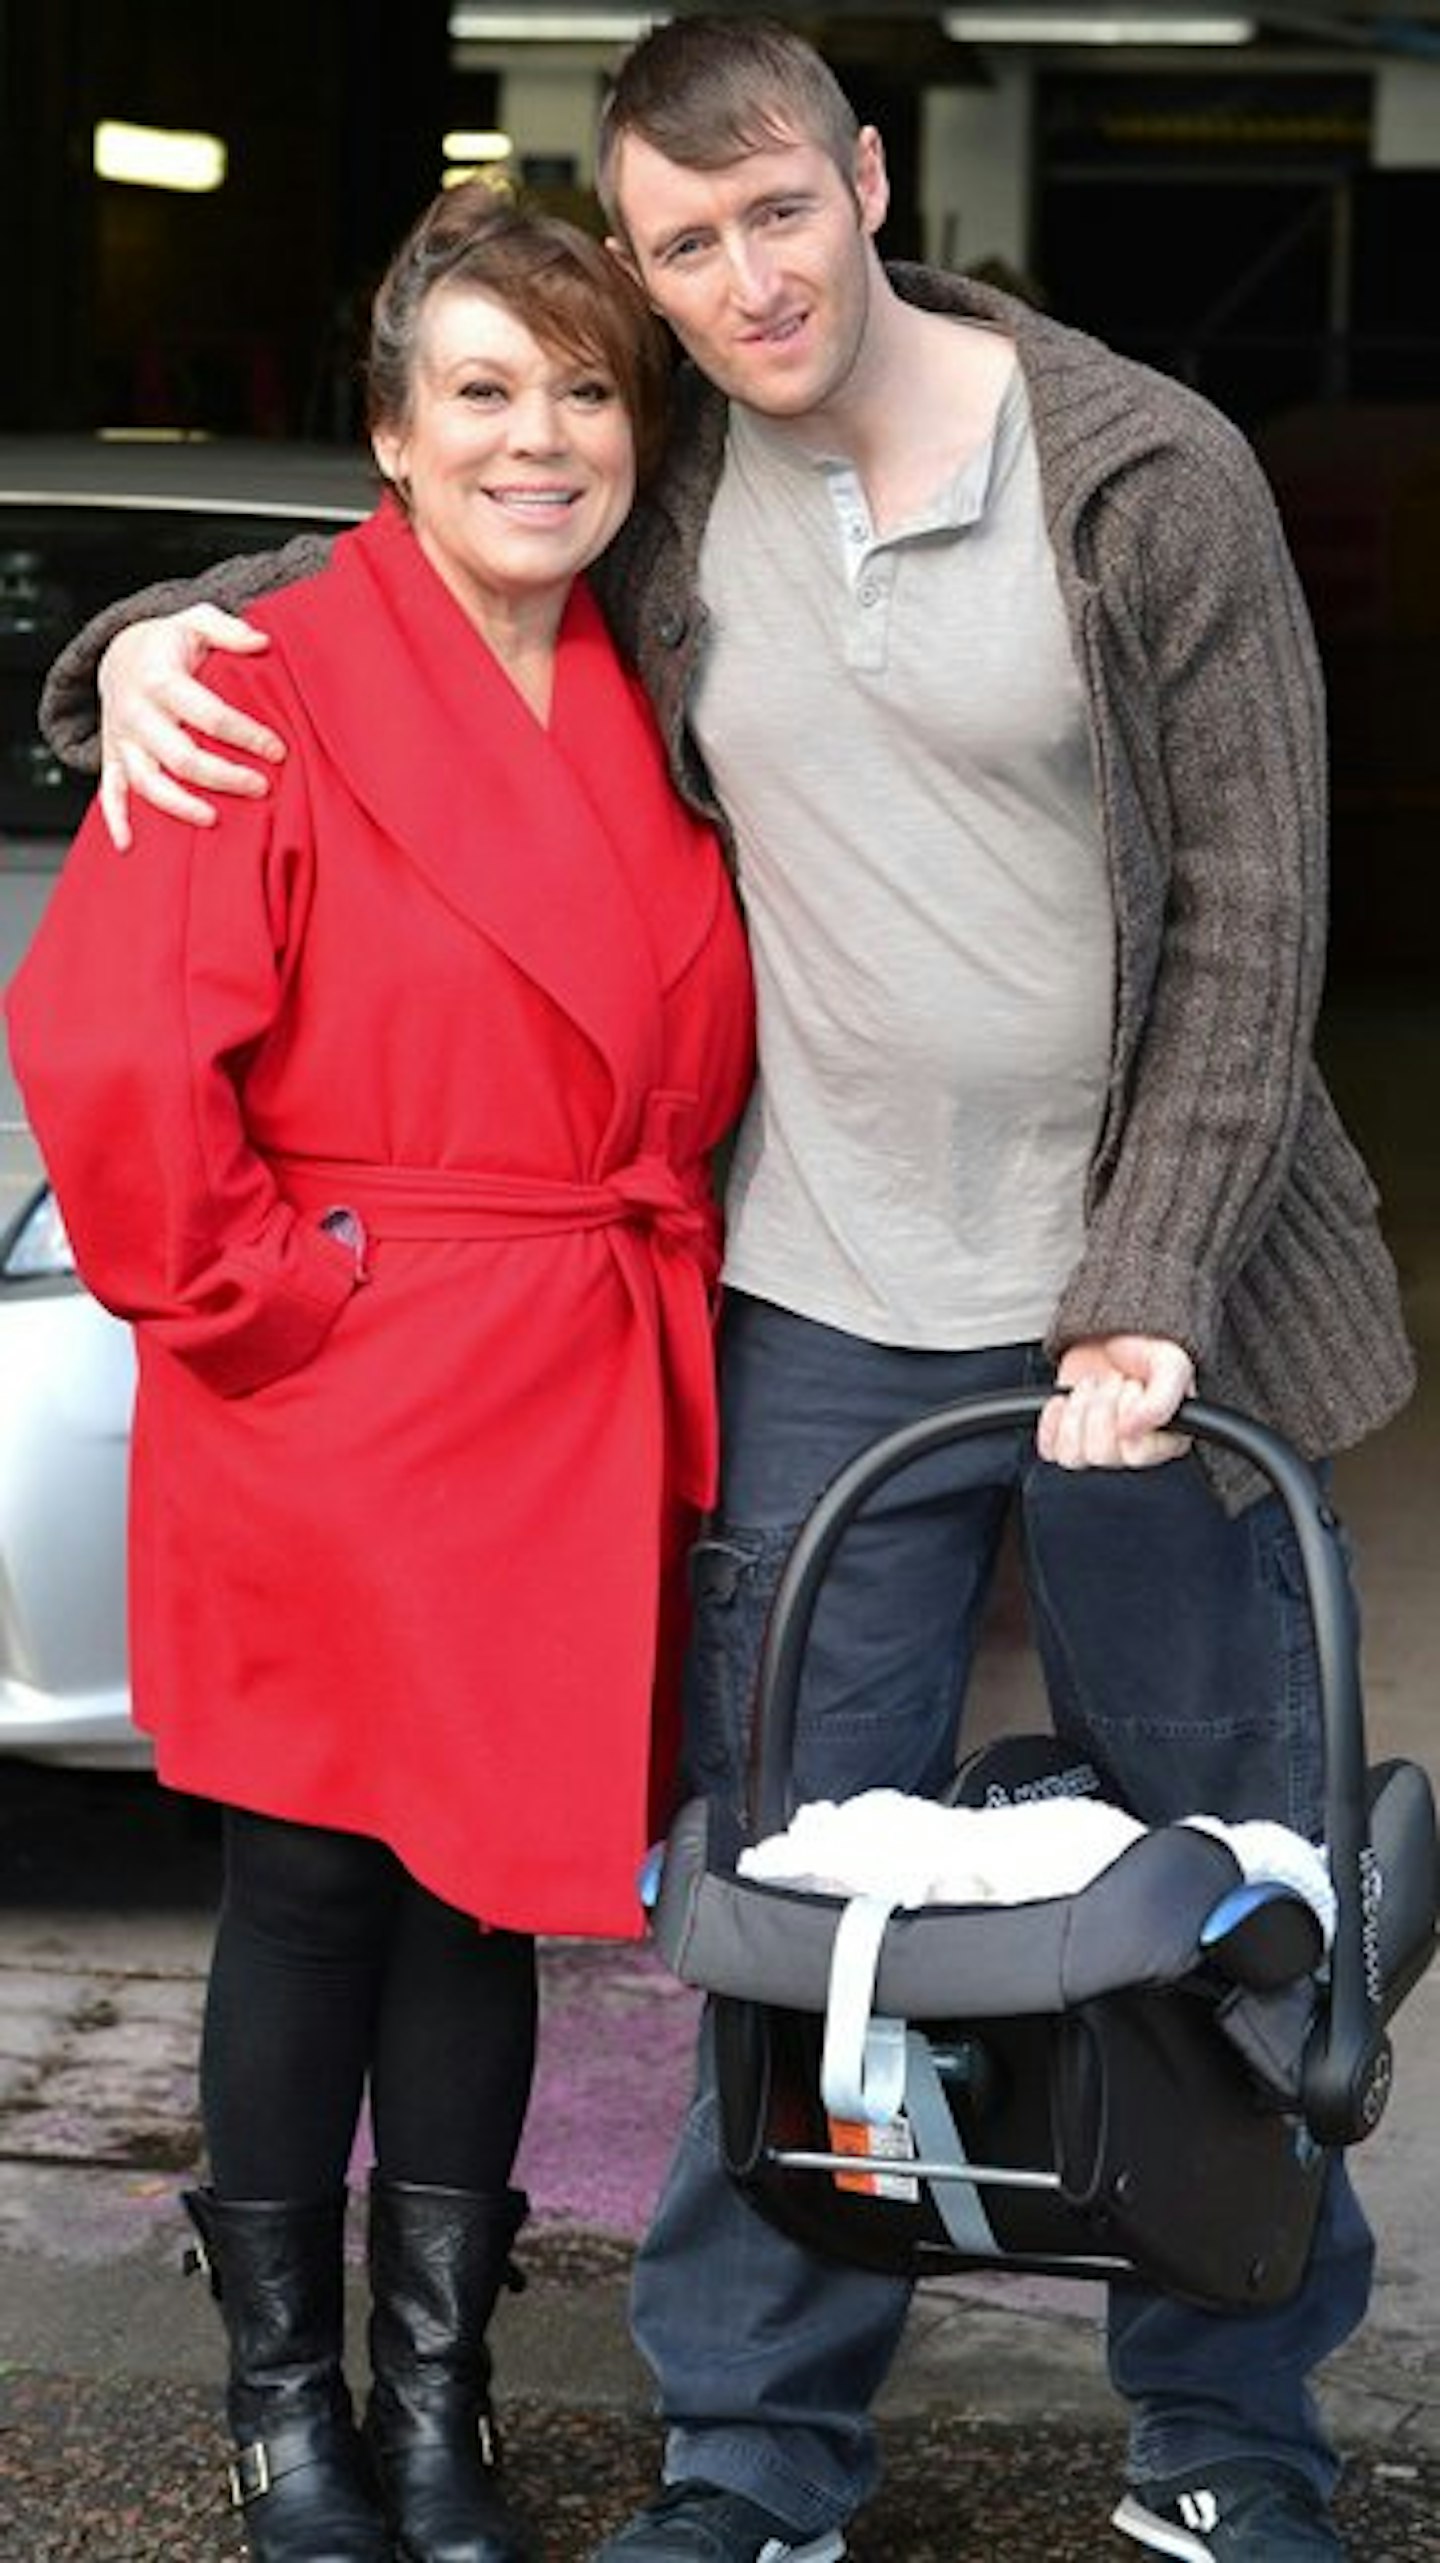 Tina with husband Paul after the birth of daughter Flame.